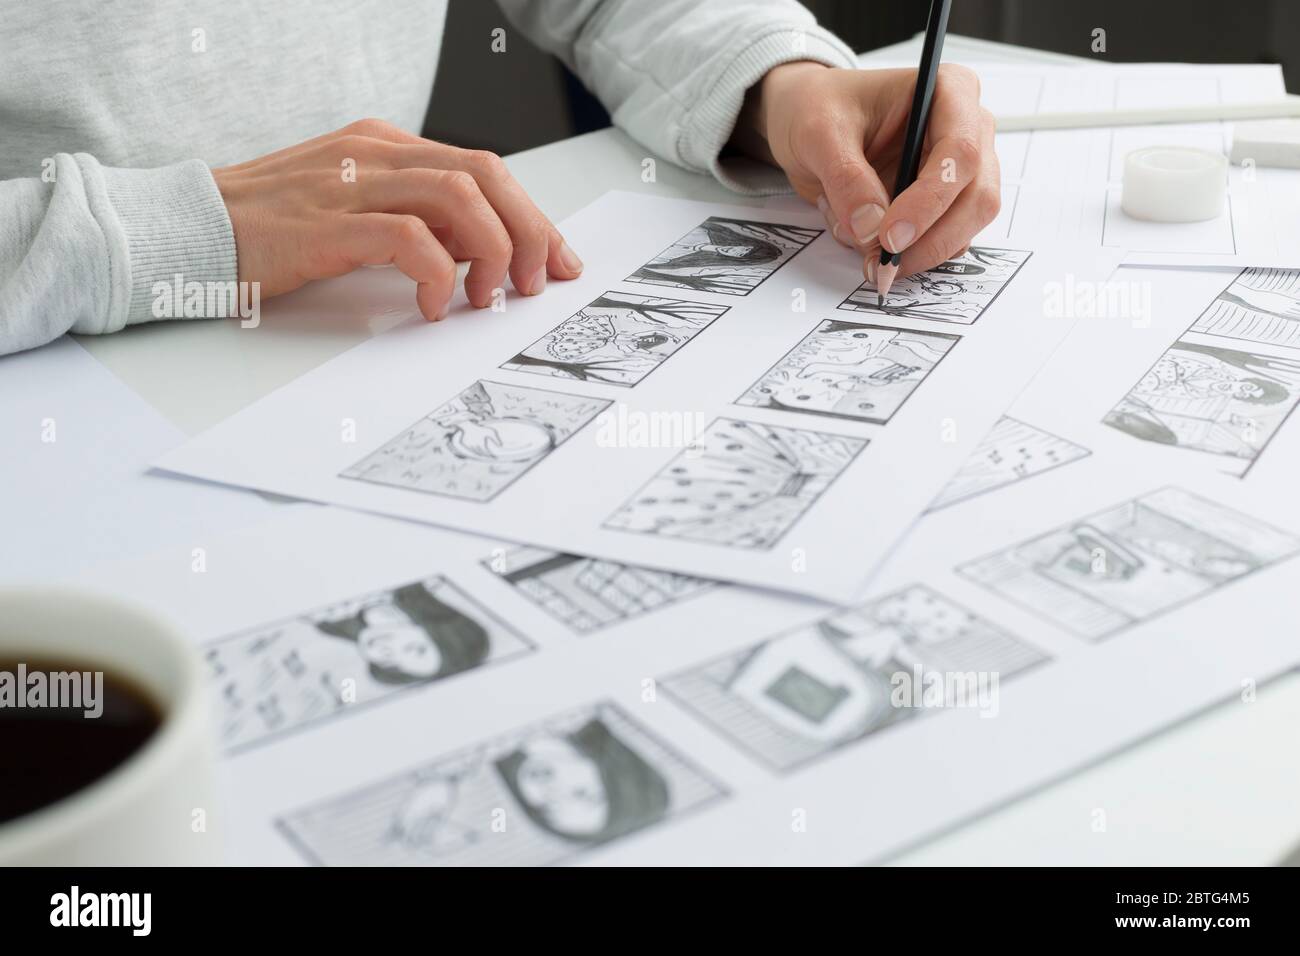 Artist illustrator draws a storyboard for the film. The animator creates sketches for the cartoon. Stock Photo